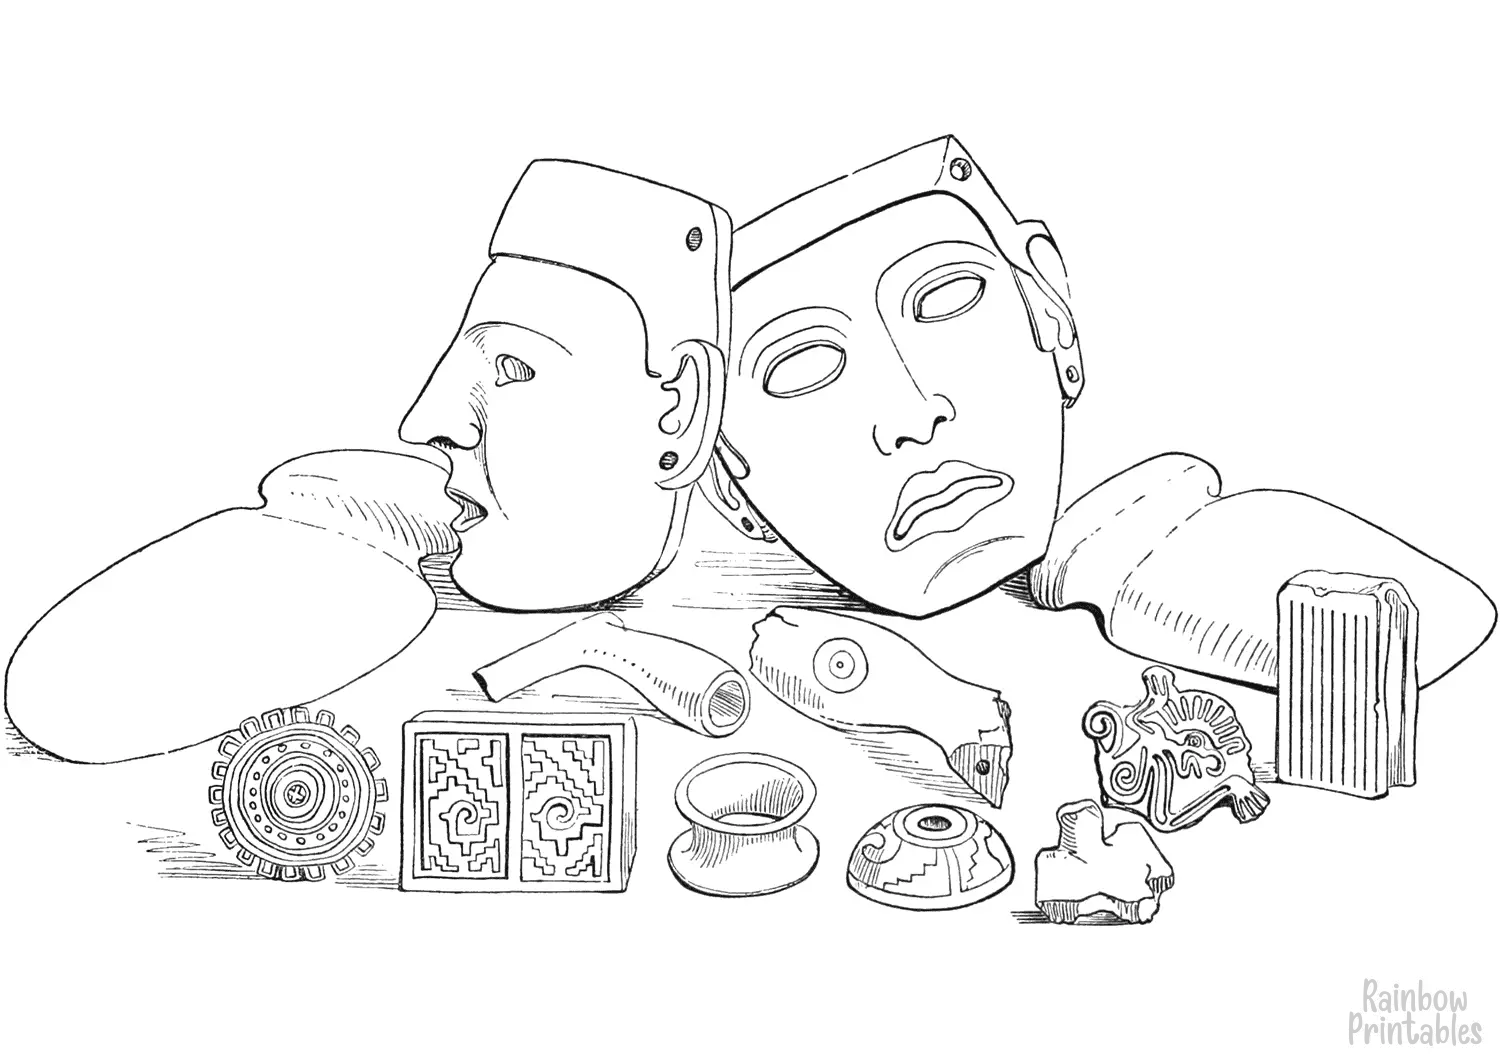 cartoon-line-art-world-cultures-aztec-masks-jewelry-coloring-page-for-kids